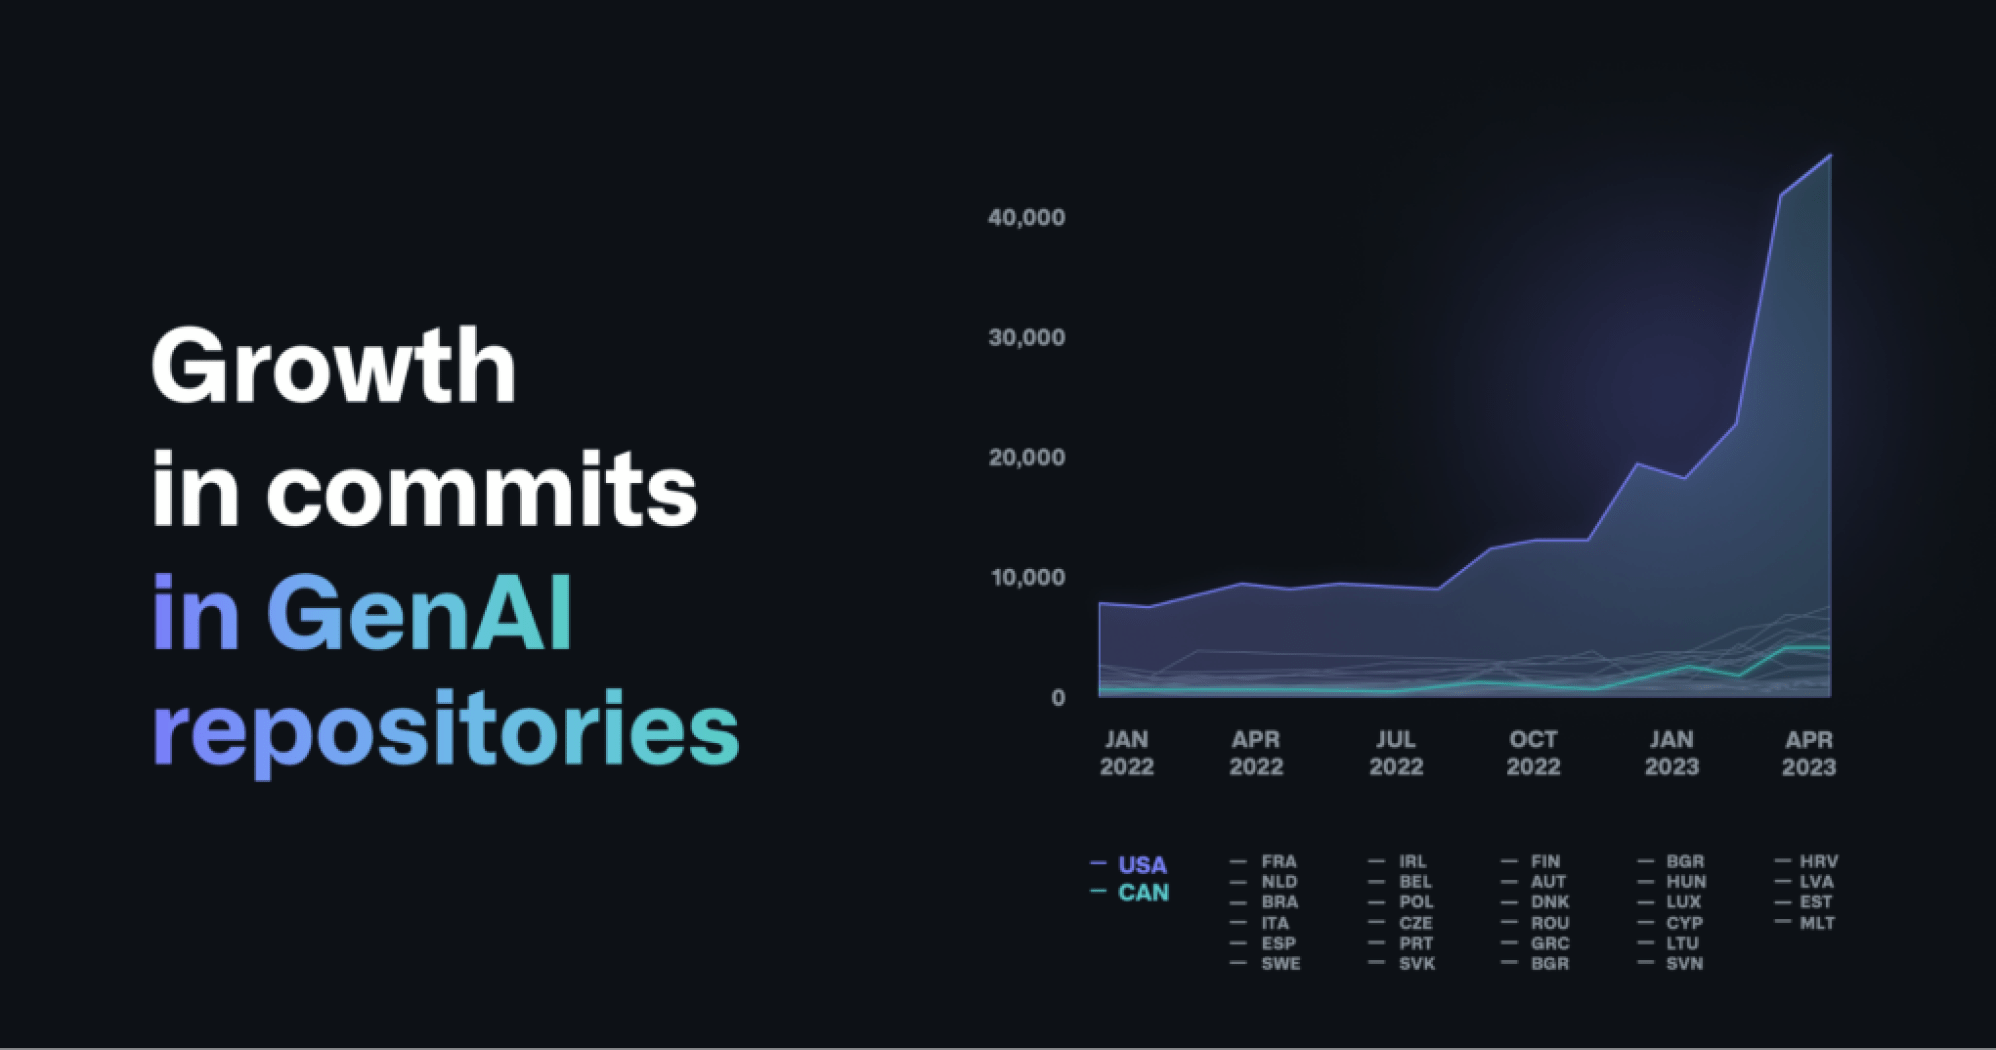 This figure shows the monthly growth in the number of commits in generative AI repositories on GitHub.